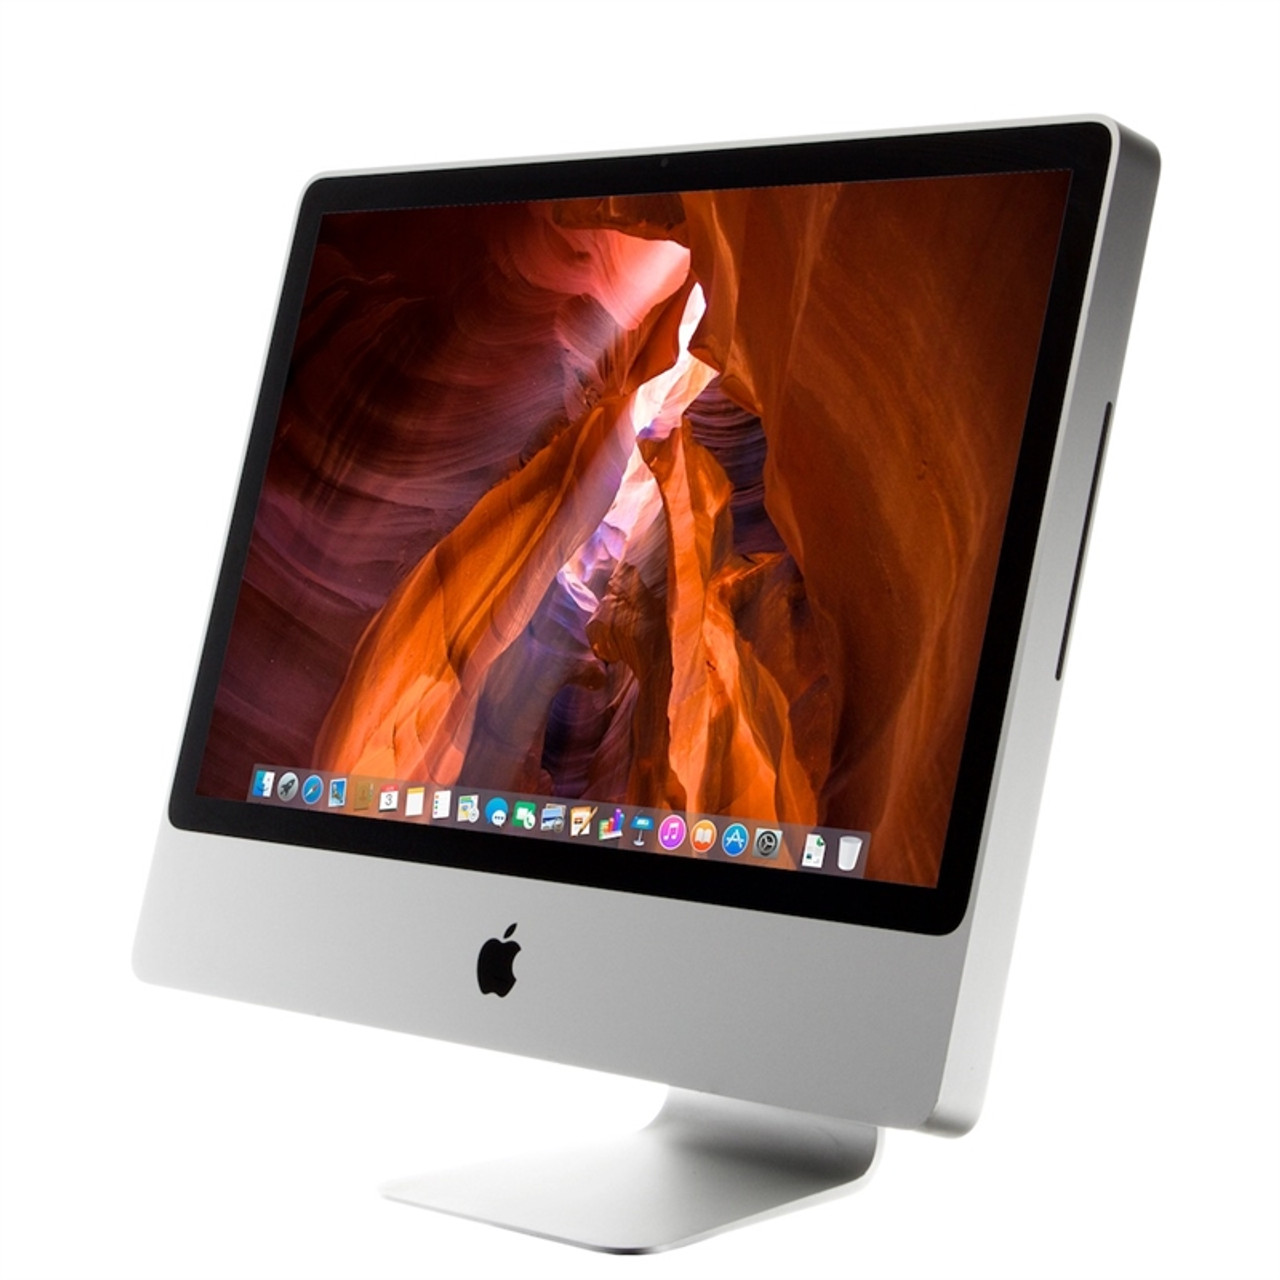 iMac 24" 2.8GHz Core 2 Extreme (Mid 2007) | mac of all trades